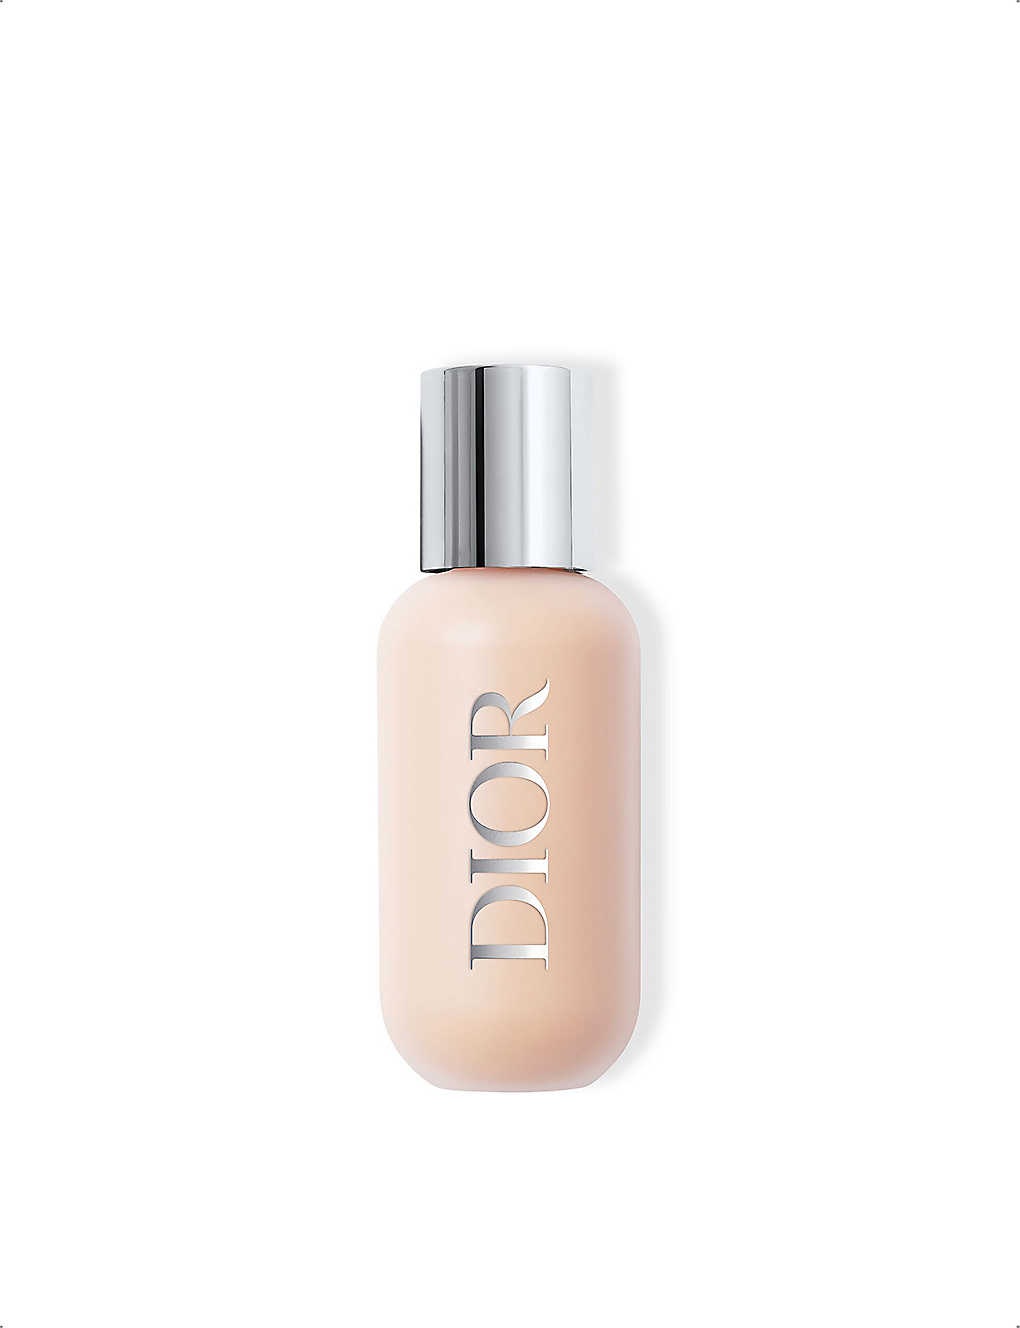 Dior Backstage Face & Body Foundation 50ml In 1c